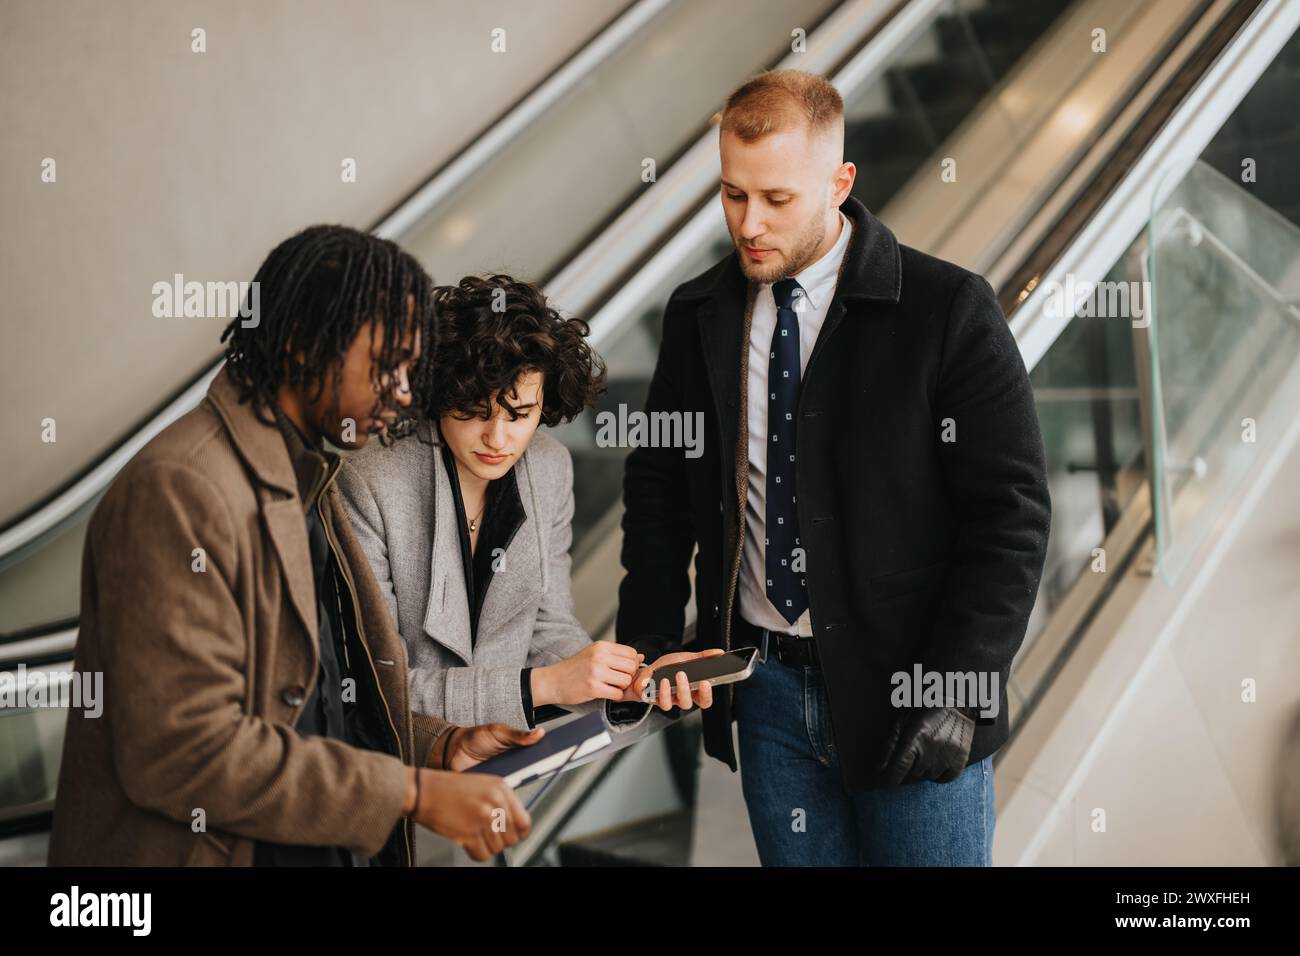 Three people colleagues in smart attire discussing over a tablet while standing on an escalator in a corporate setting. Stock Photo